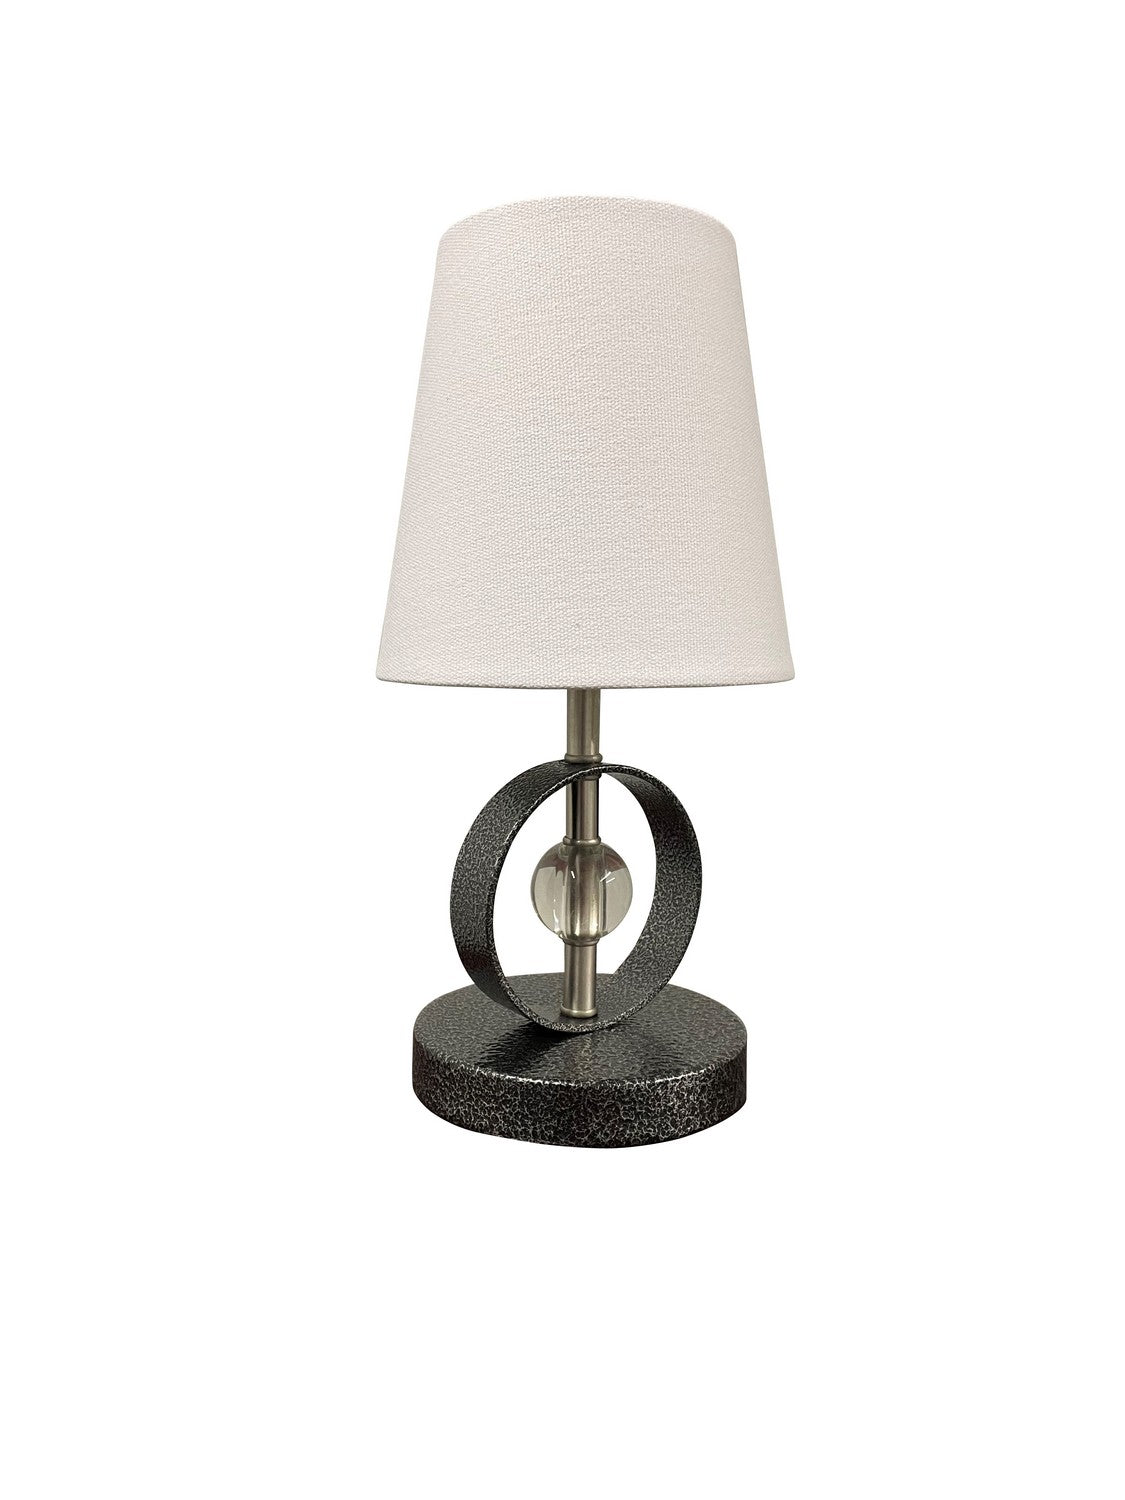 House of Troy - B210-SN/SS - One Light Accent Lamp - Bryson - Satin Nickel/Supreme Silver